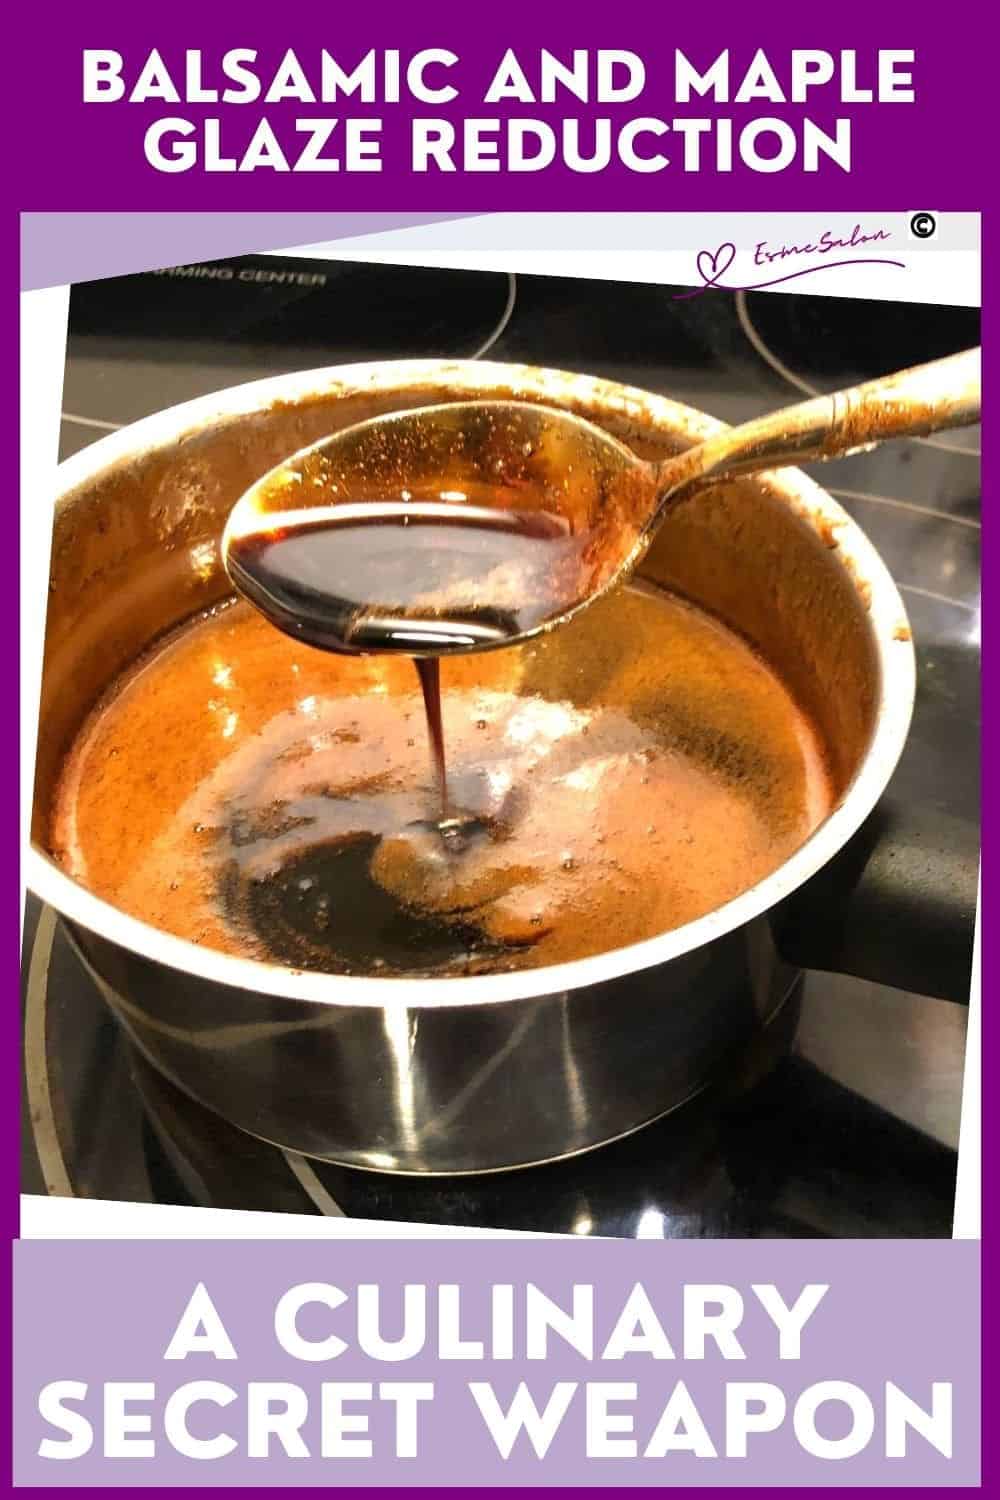 an image of a pot on the stove busy cooking Balsamic and Maple Glaze Reduction